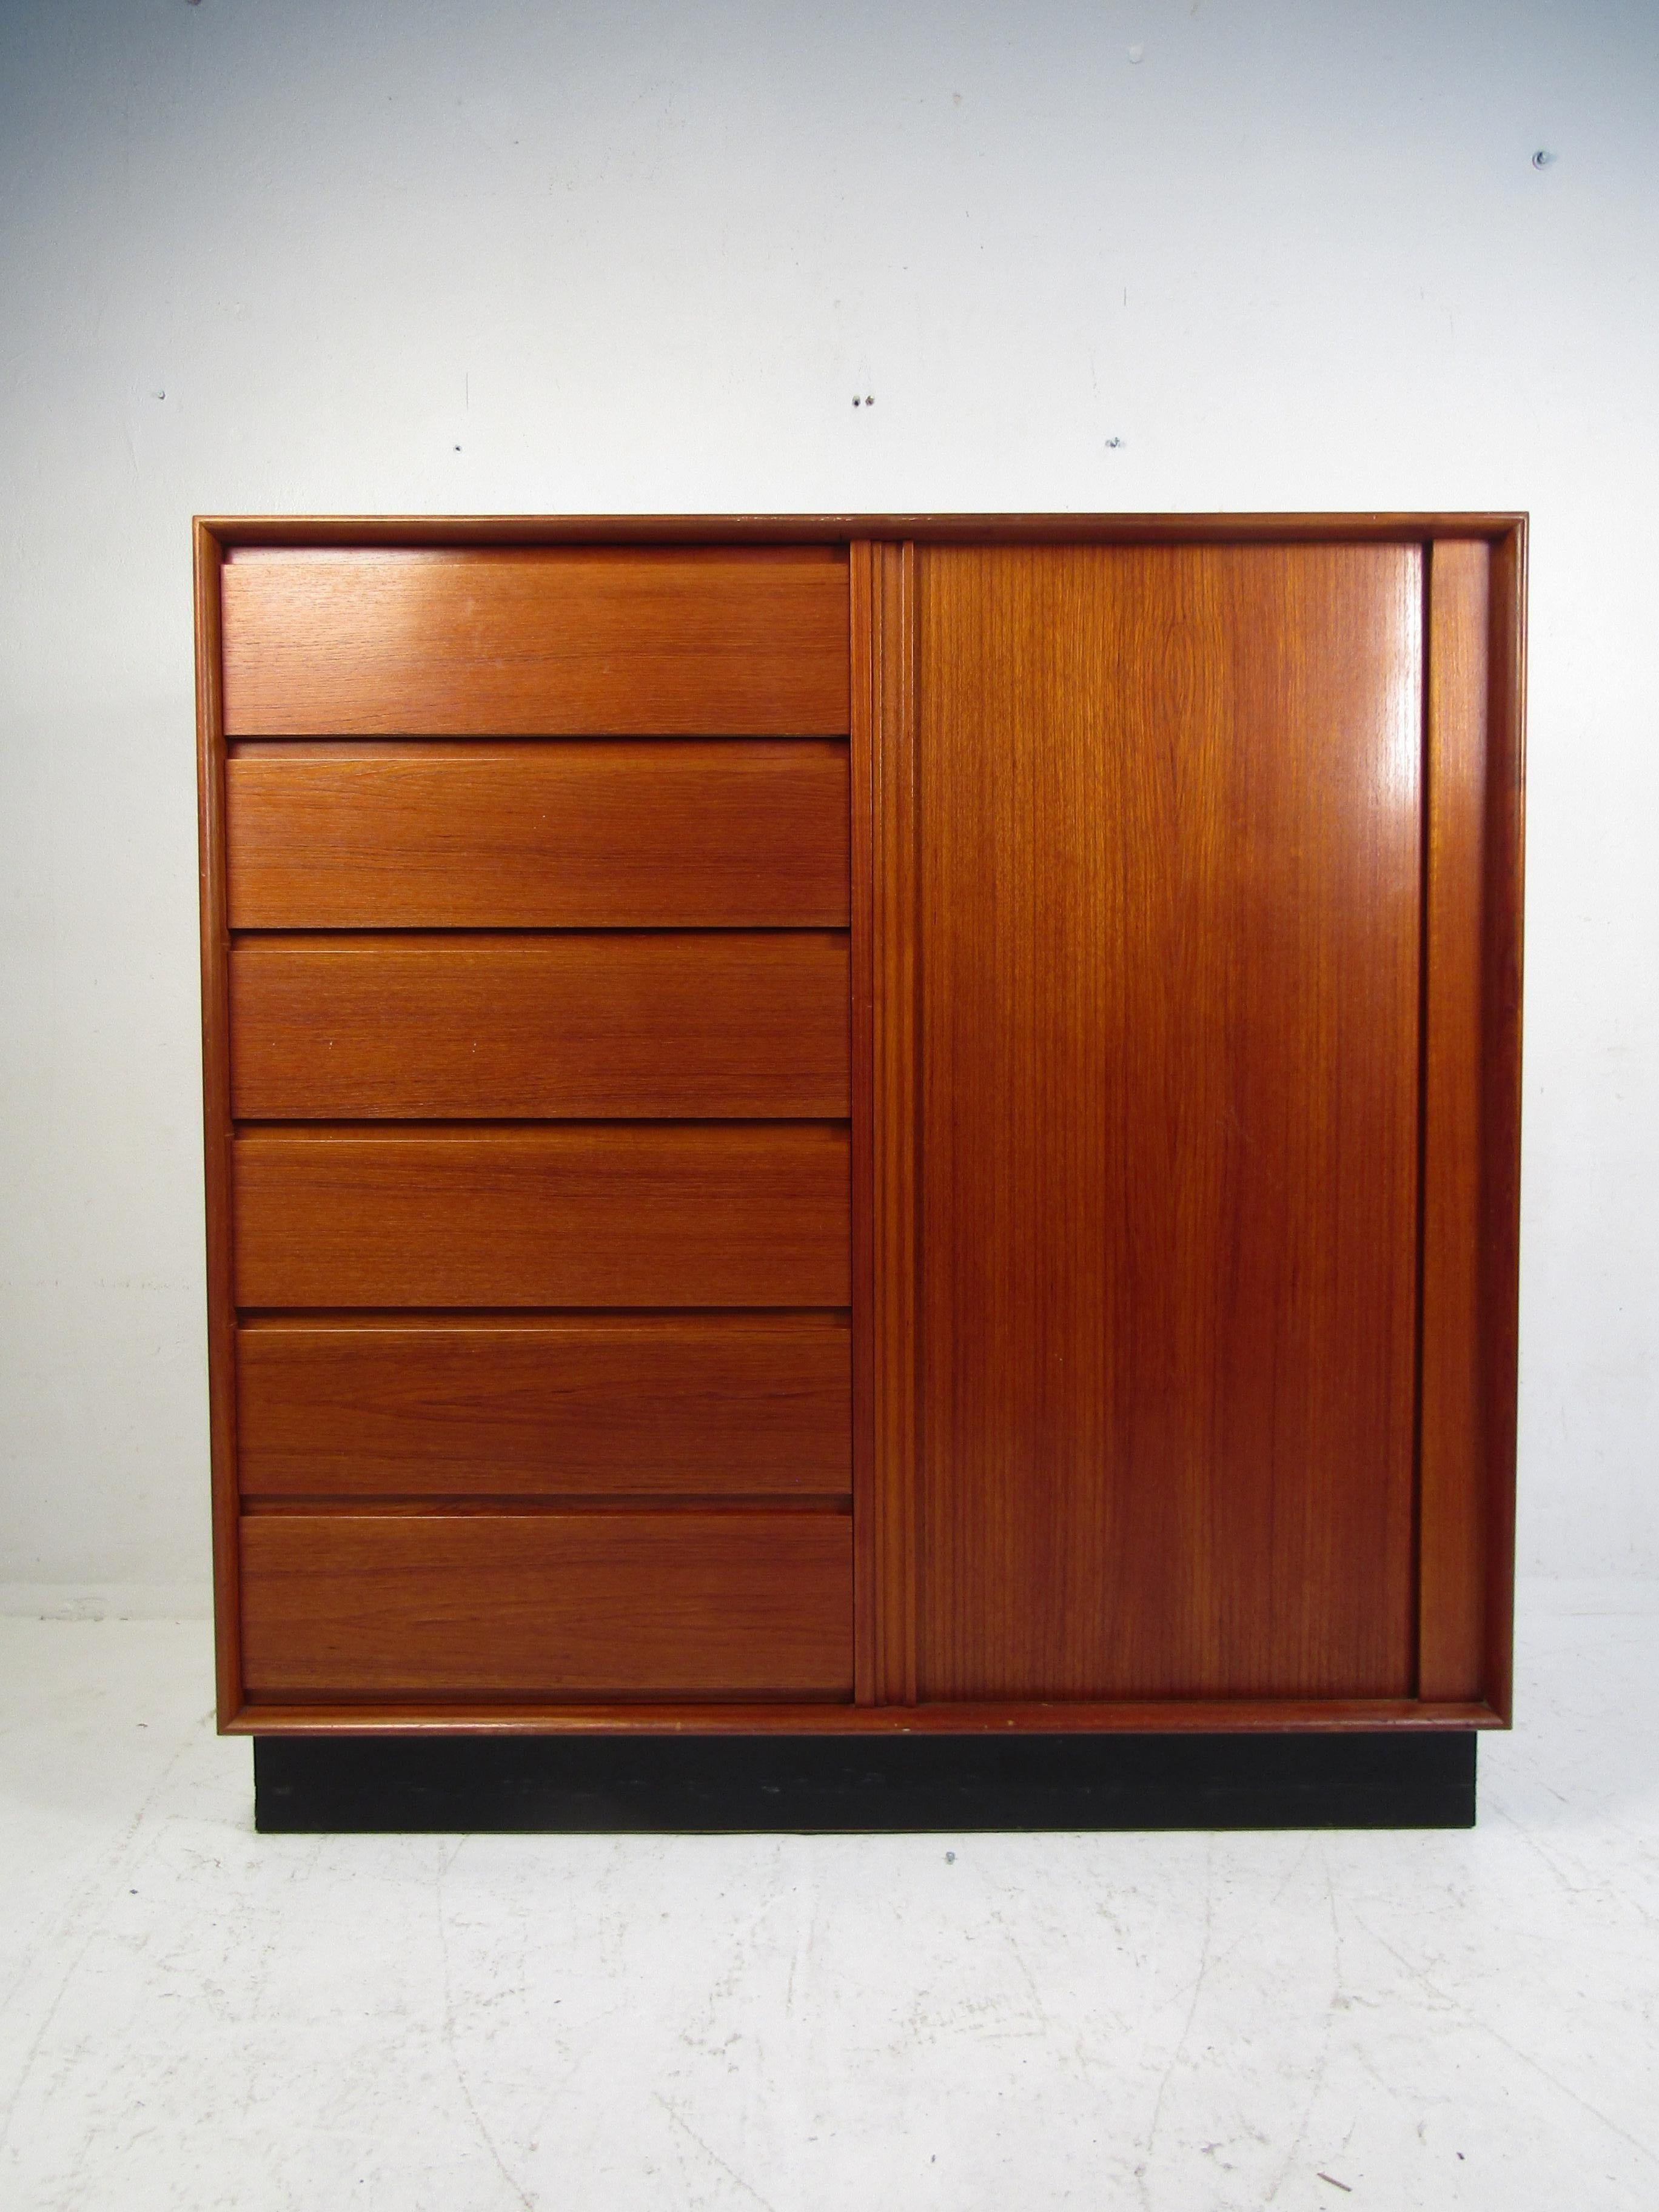 Stylish Danish midcentury high dresser. Teak wood exterior, with a black skirt base. Ample storage space between the dresser drawers on the left, and the sliding drawers on the right which are concealed by a well-made tambour door. A great piece